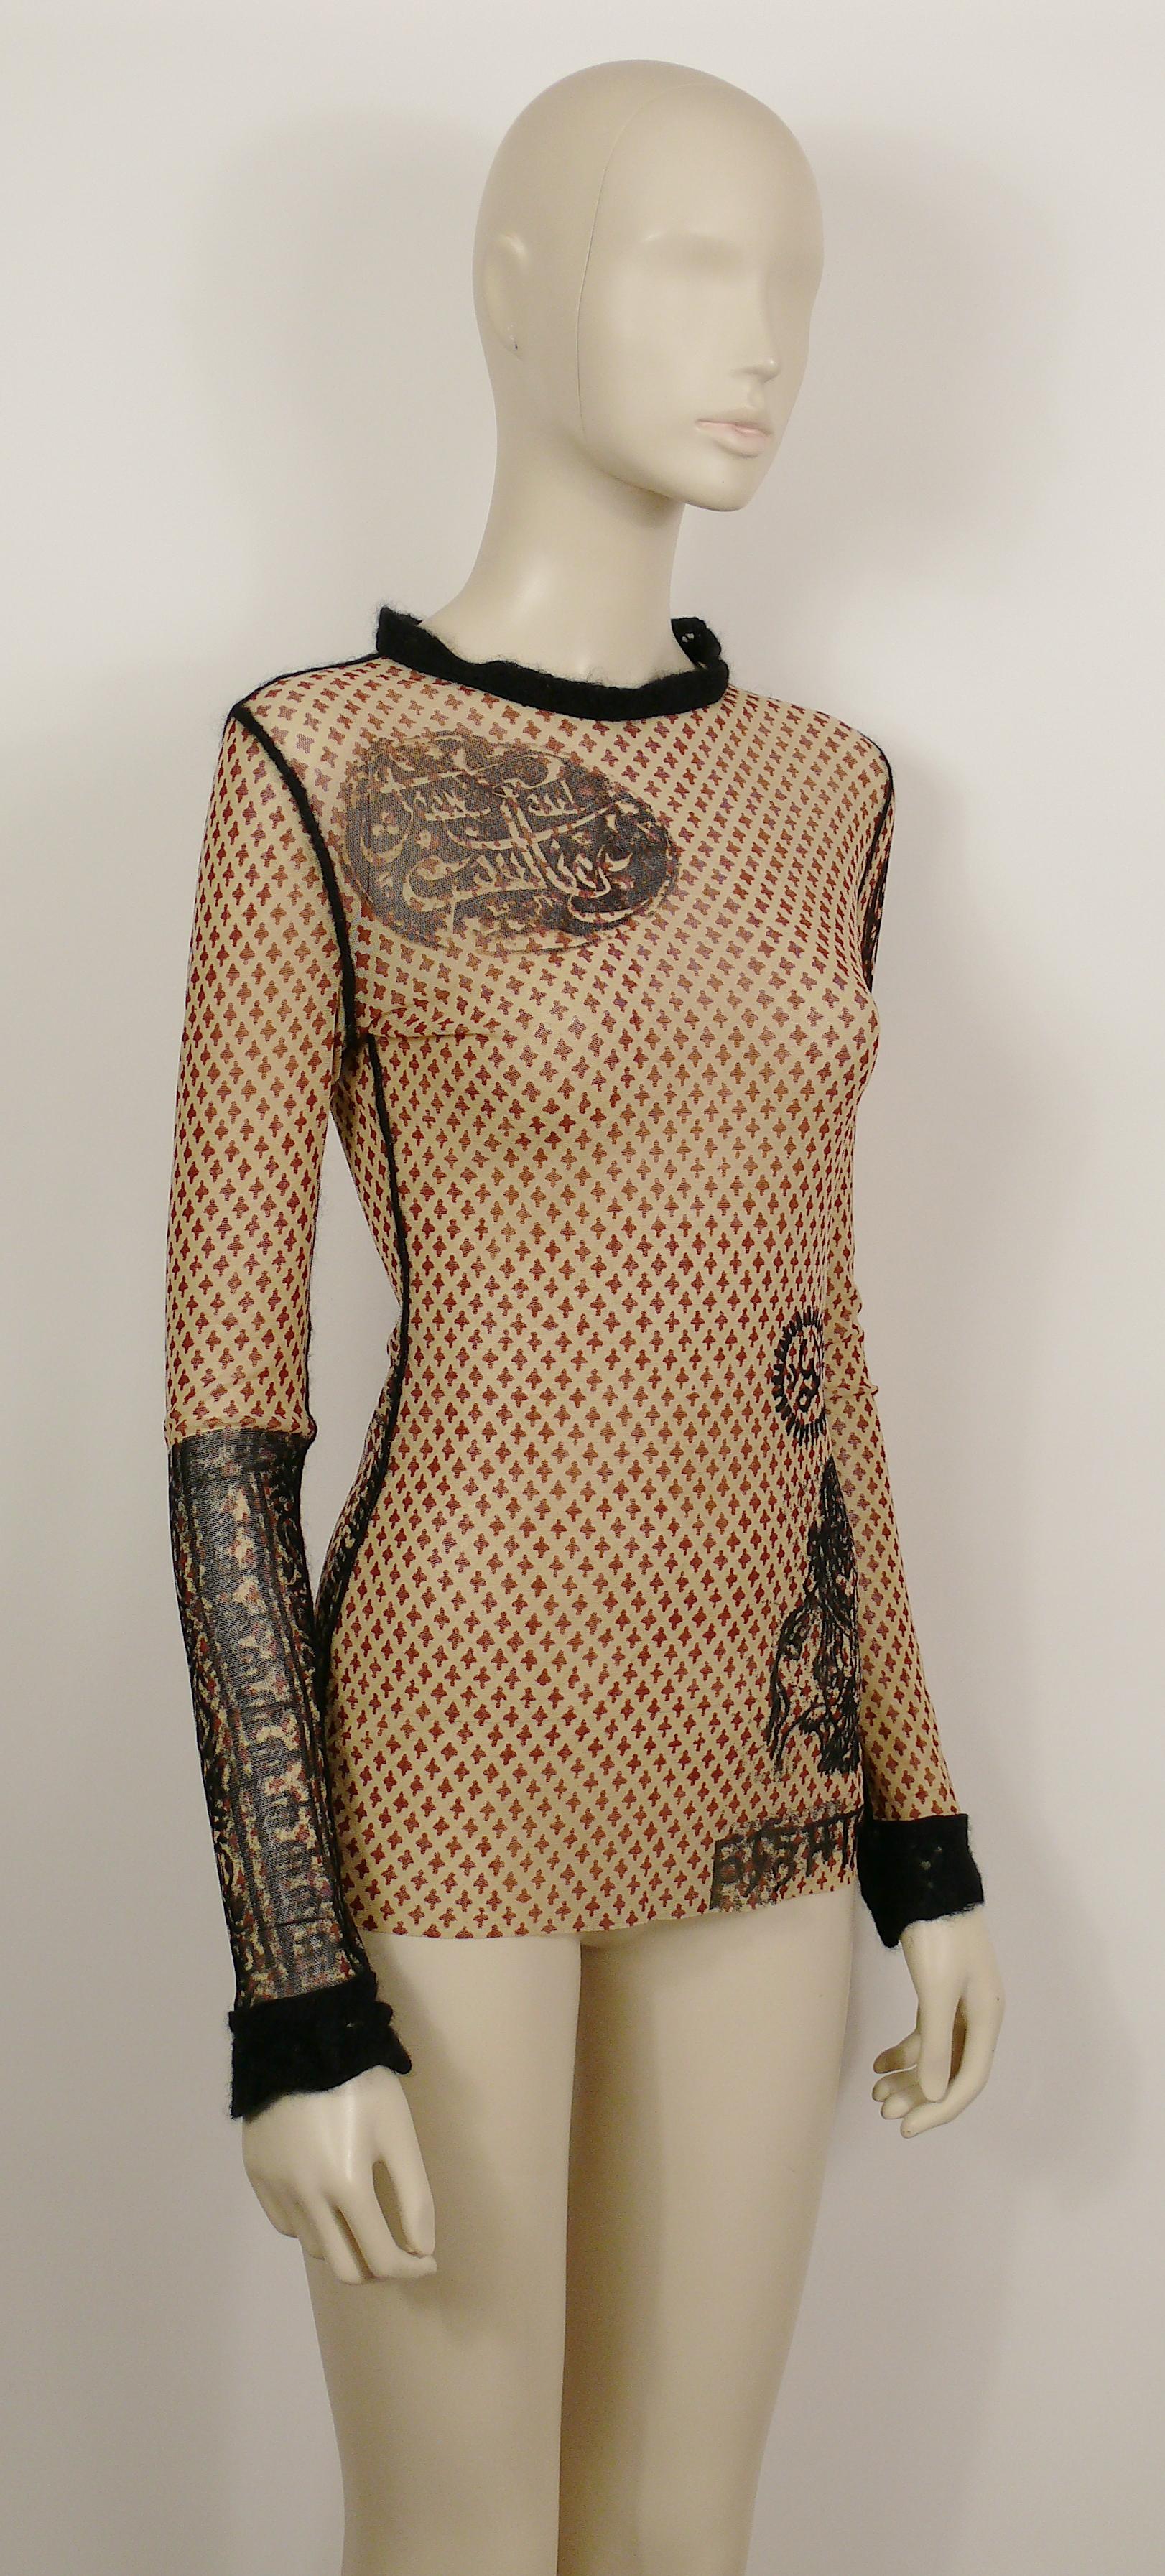 JEAN PAUL GAULTIER vintage oriental sheer mesh tattoo top featuring black angora knitted collar, cuffs and seams.

Missing brand label.
Printed JEAN PAUL GAULTIER on the mesh (see photo 4).

Missing size label.
Please refer to measurements.

Mission